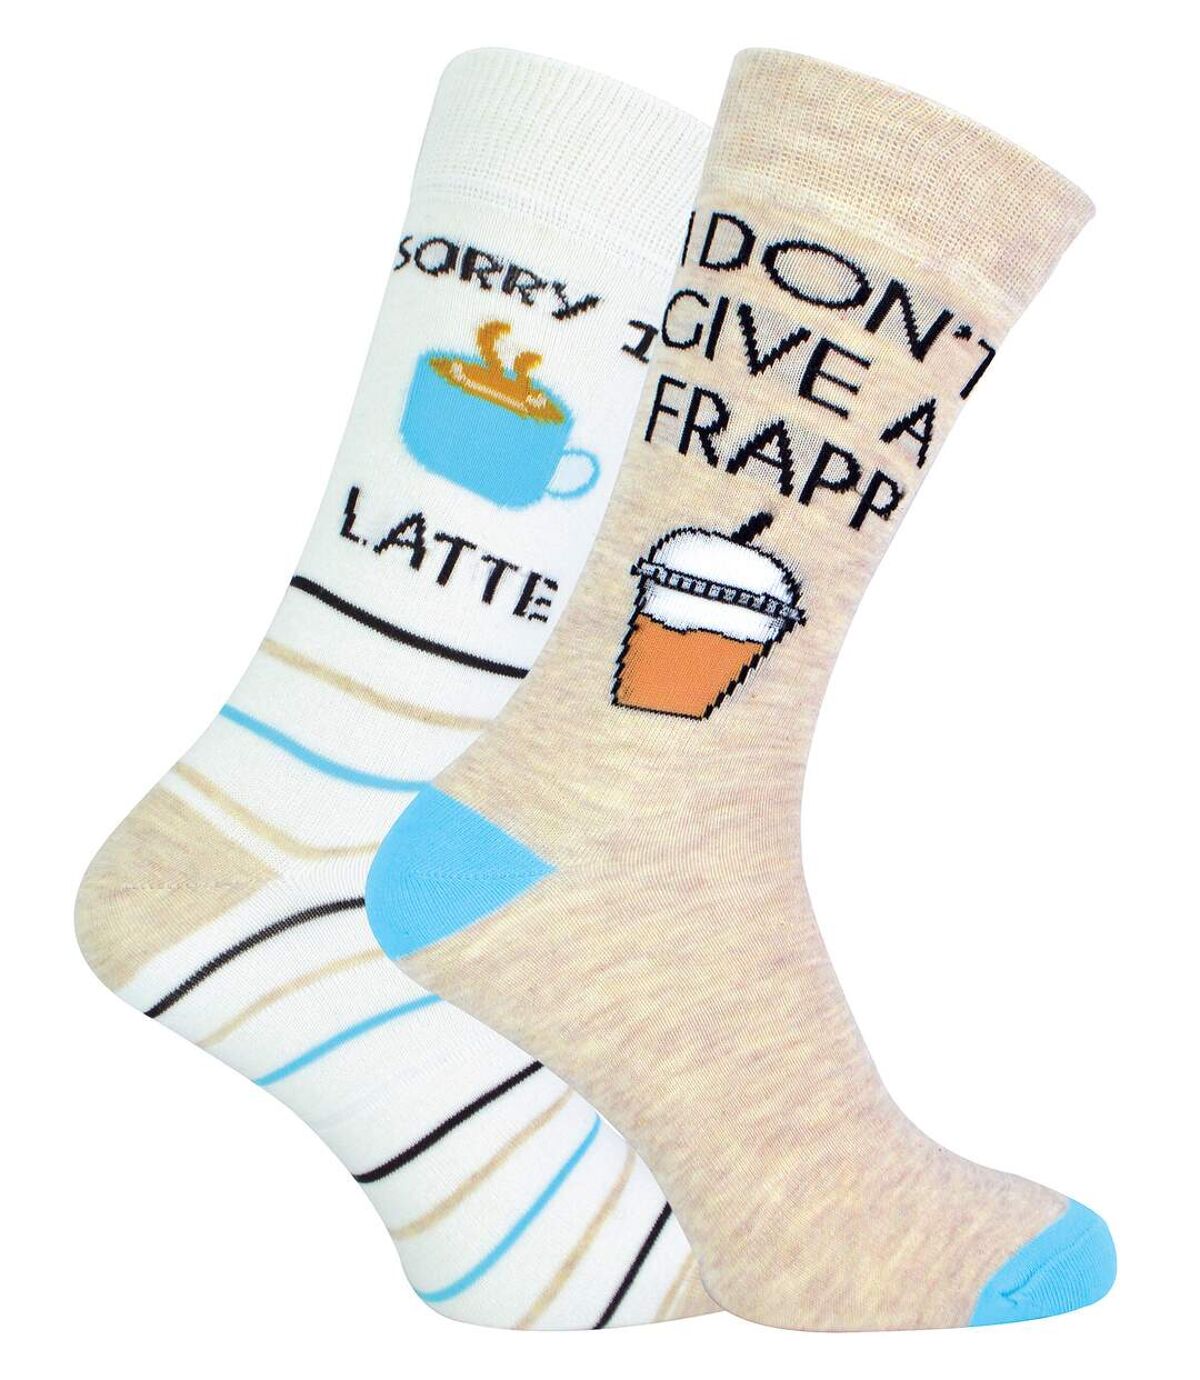 Novelty Coffee Socks in a Gift Box | 2 Pairs | Cotton | Urban Eccentric